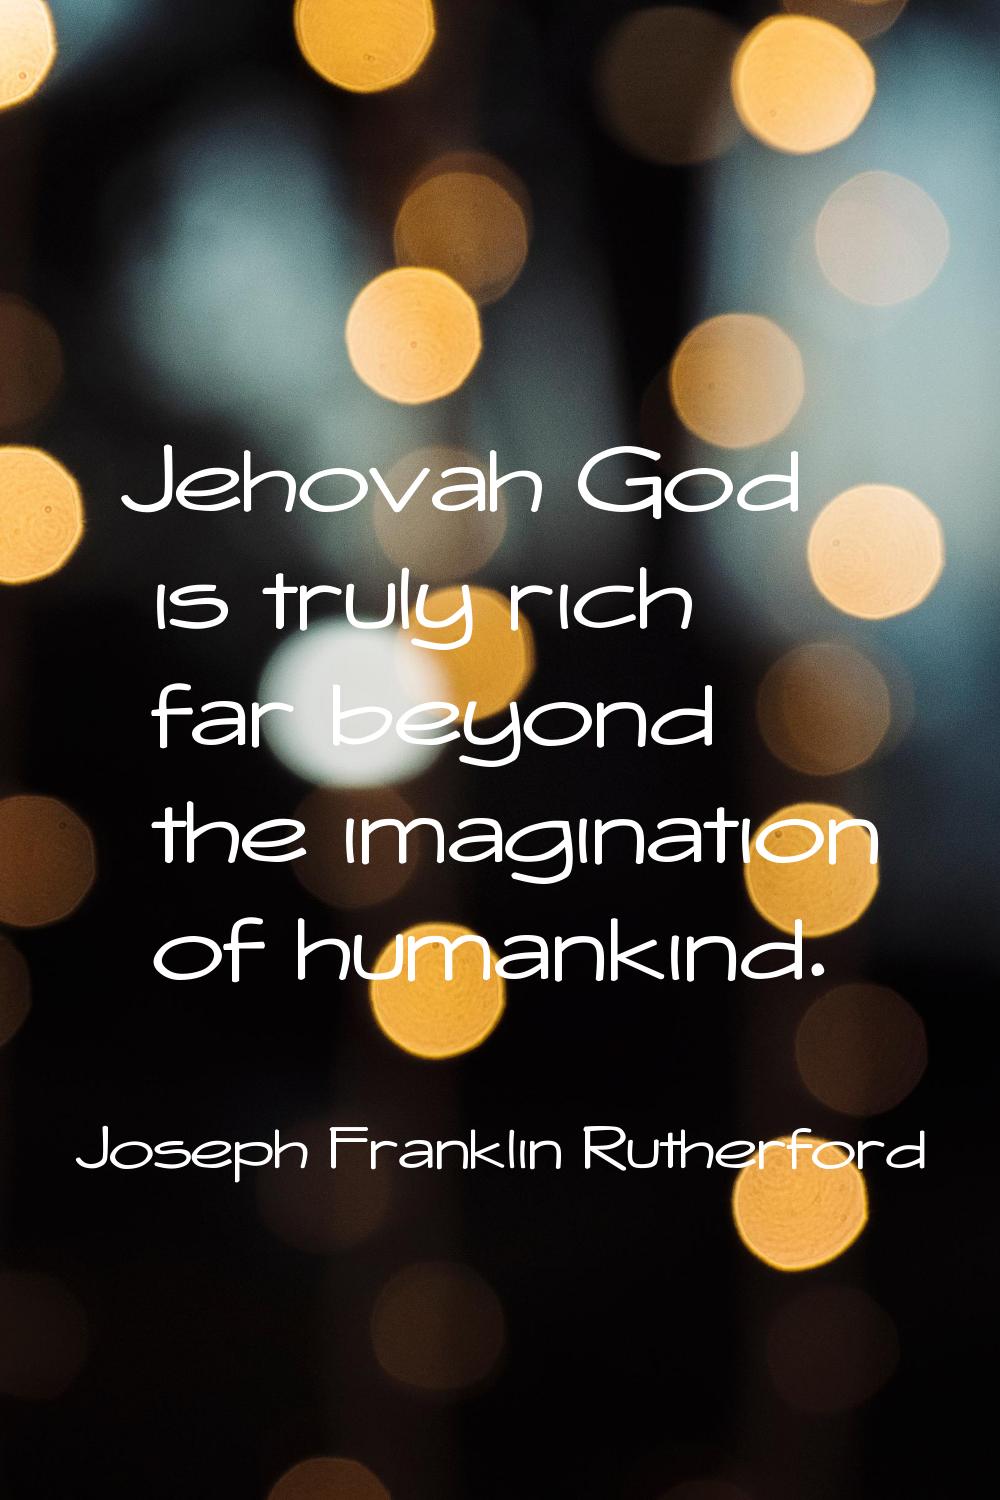 Jehovah God is truly rich far beyond the imagination of humankind.